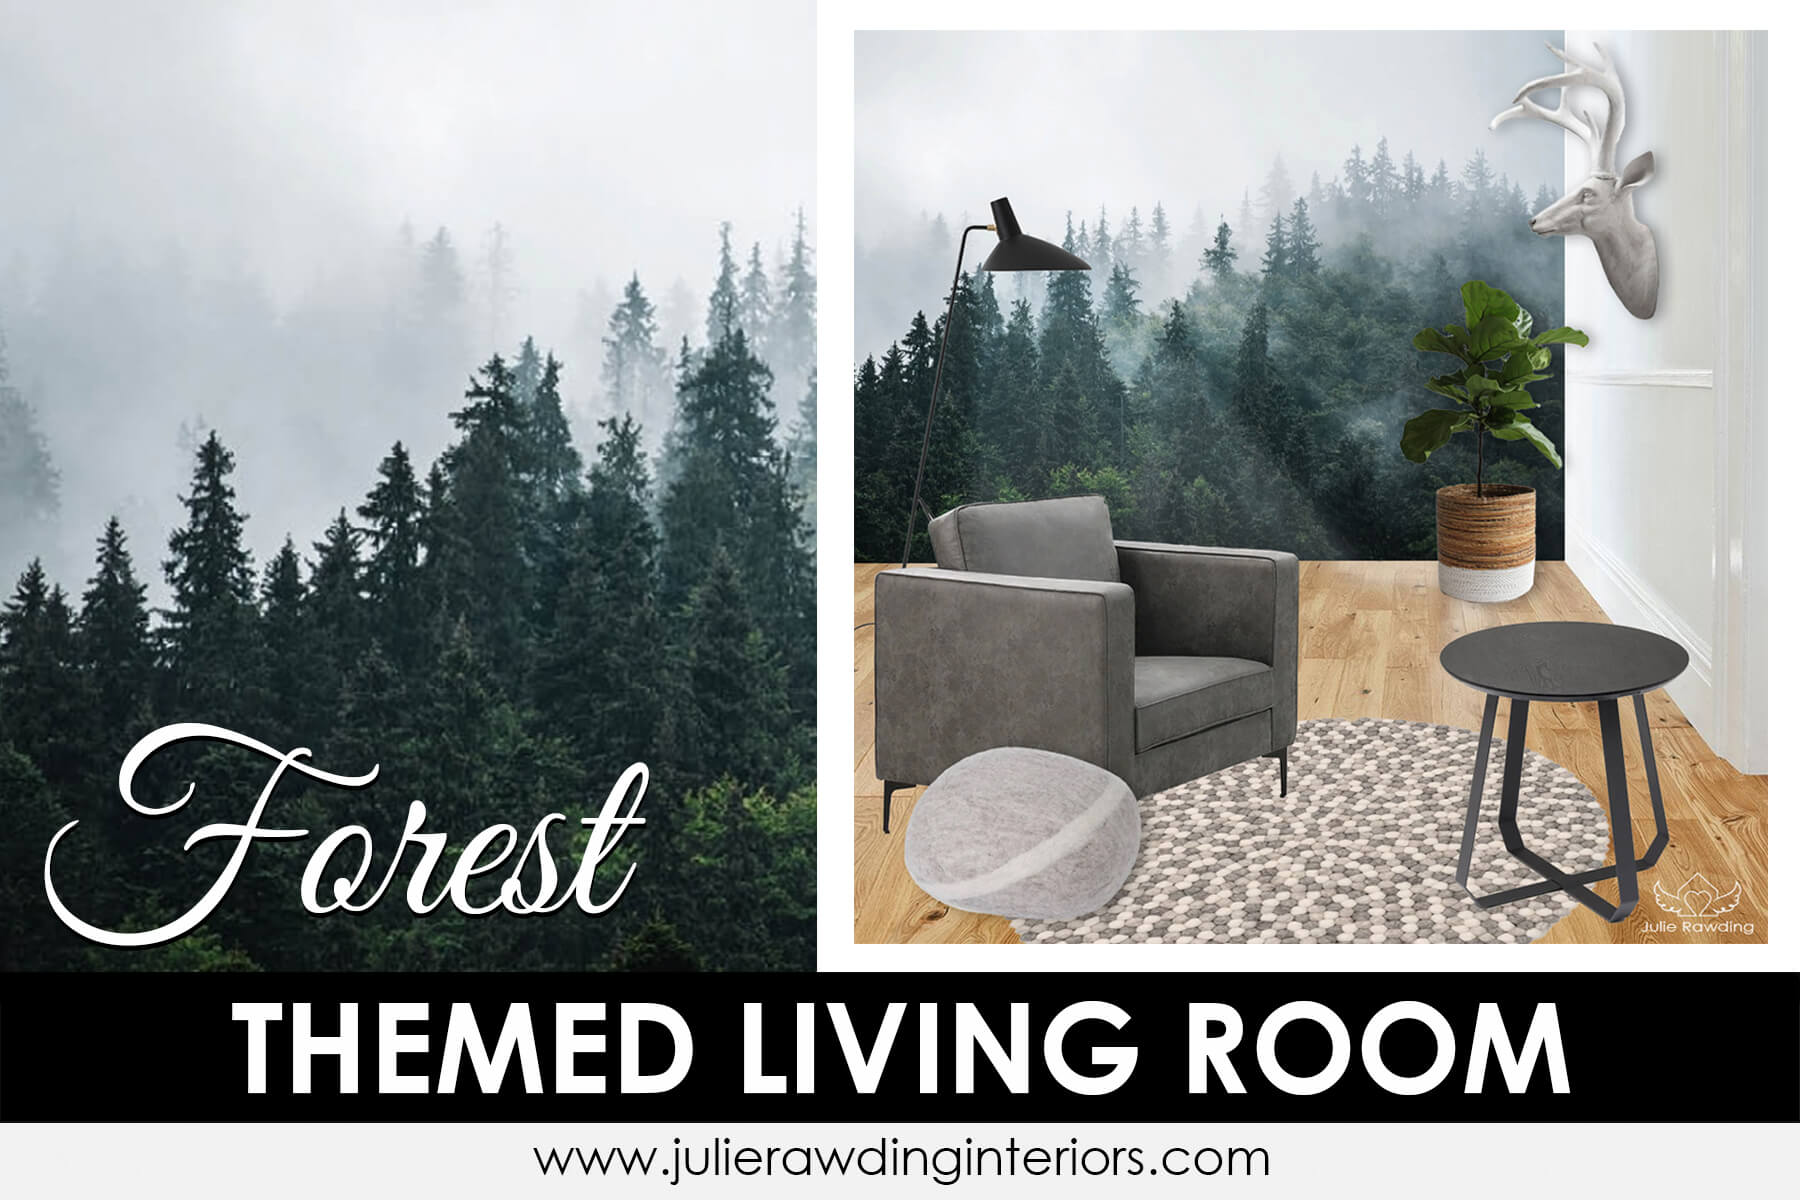 The Truth About Forest Themed Living Rooms